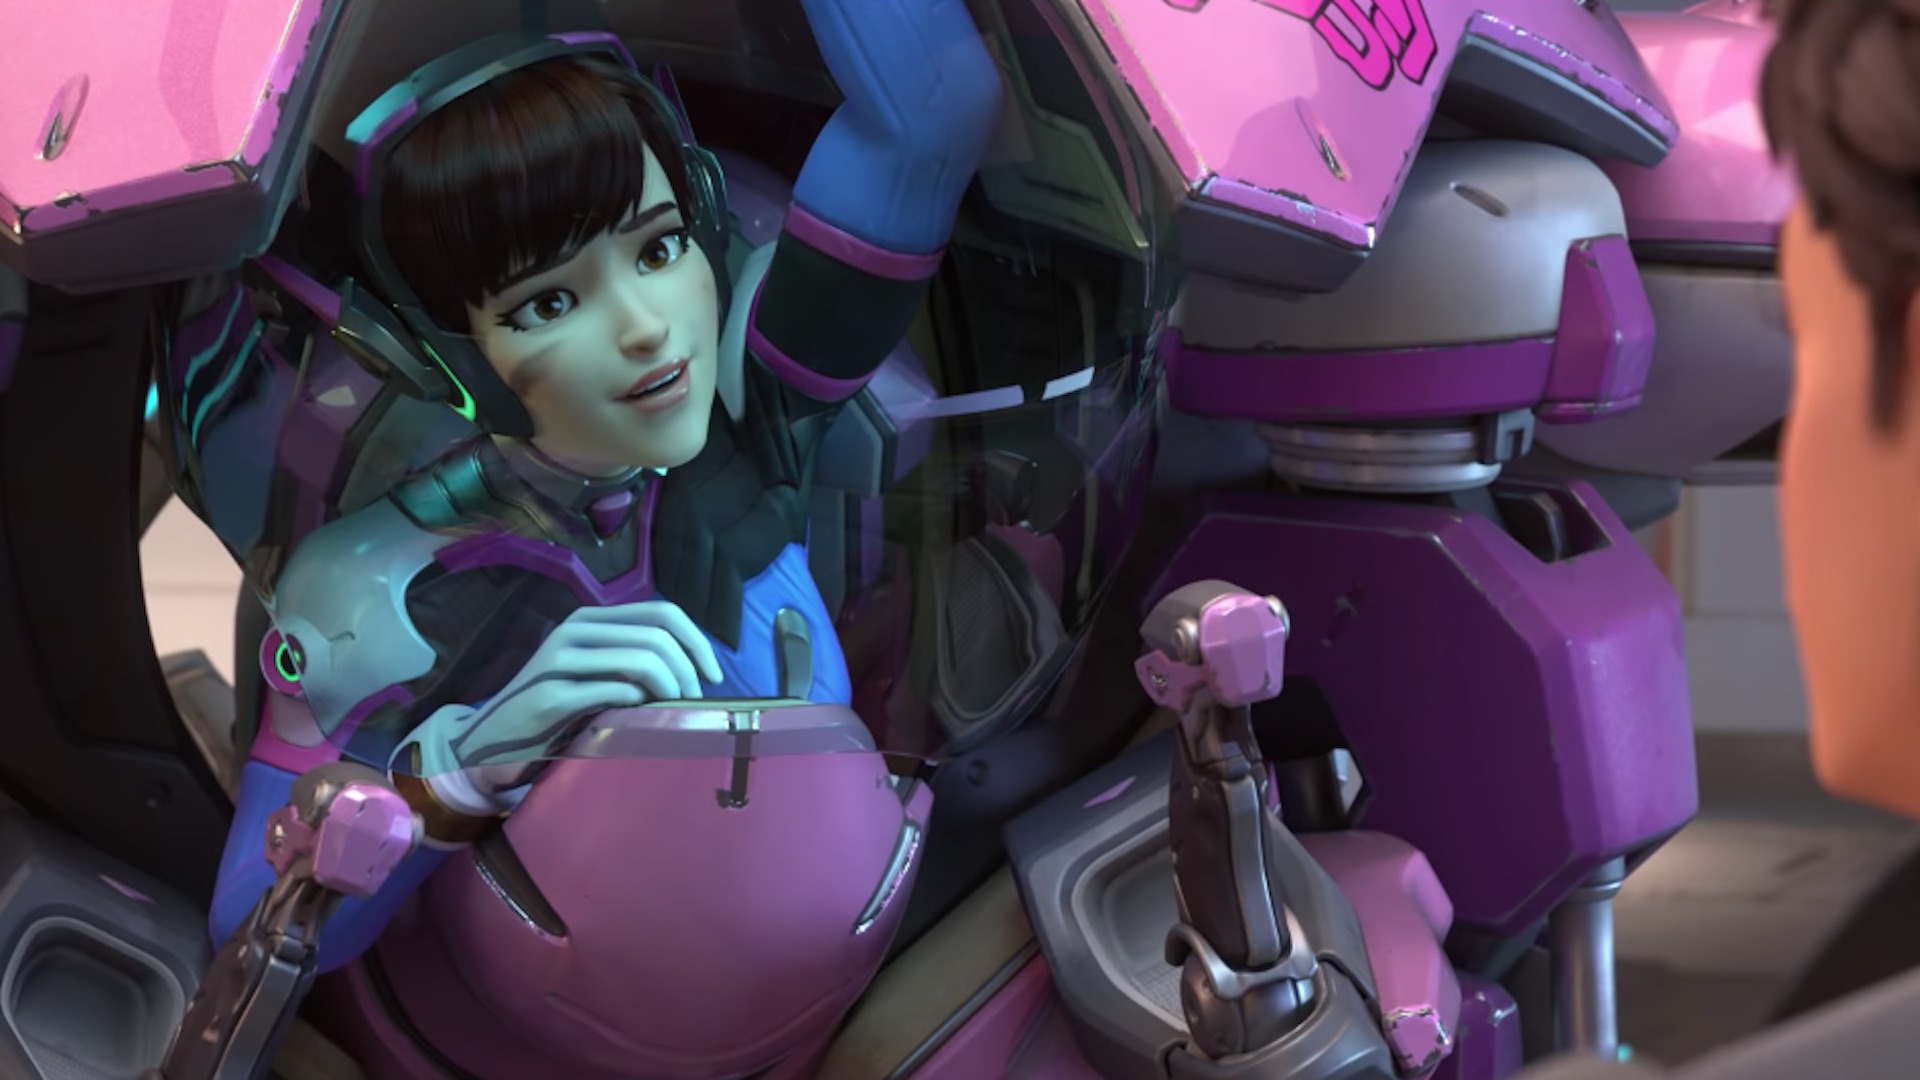 Dva shows off a little too much. Дива овервотч фулл. Короткометражки овервотч. Дива овервотч из короткометражки. Дива овервотч арт из короткометражки.